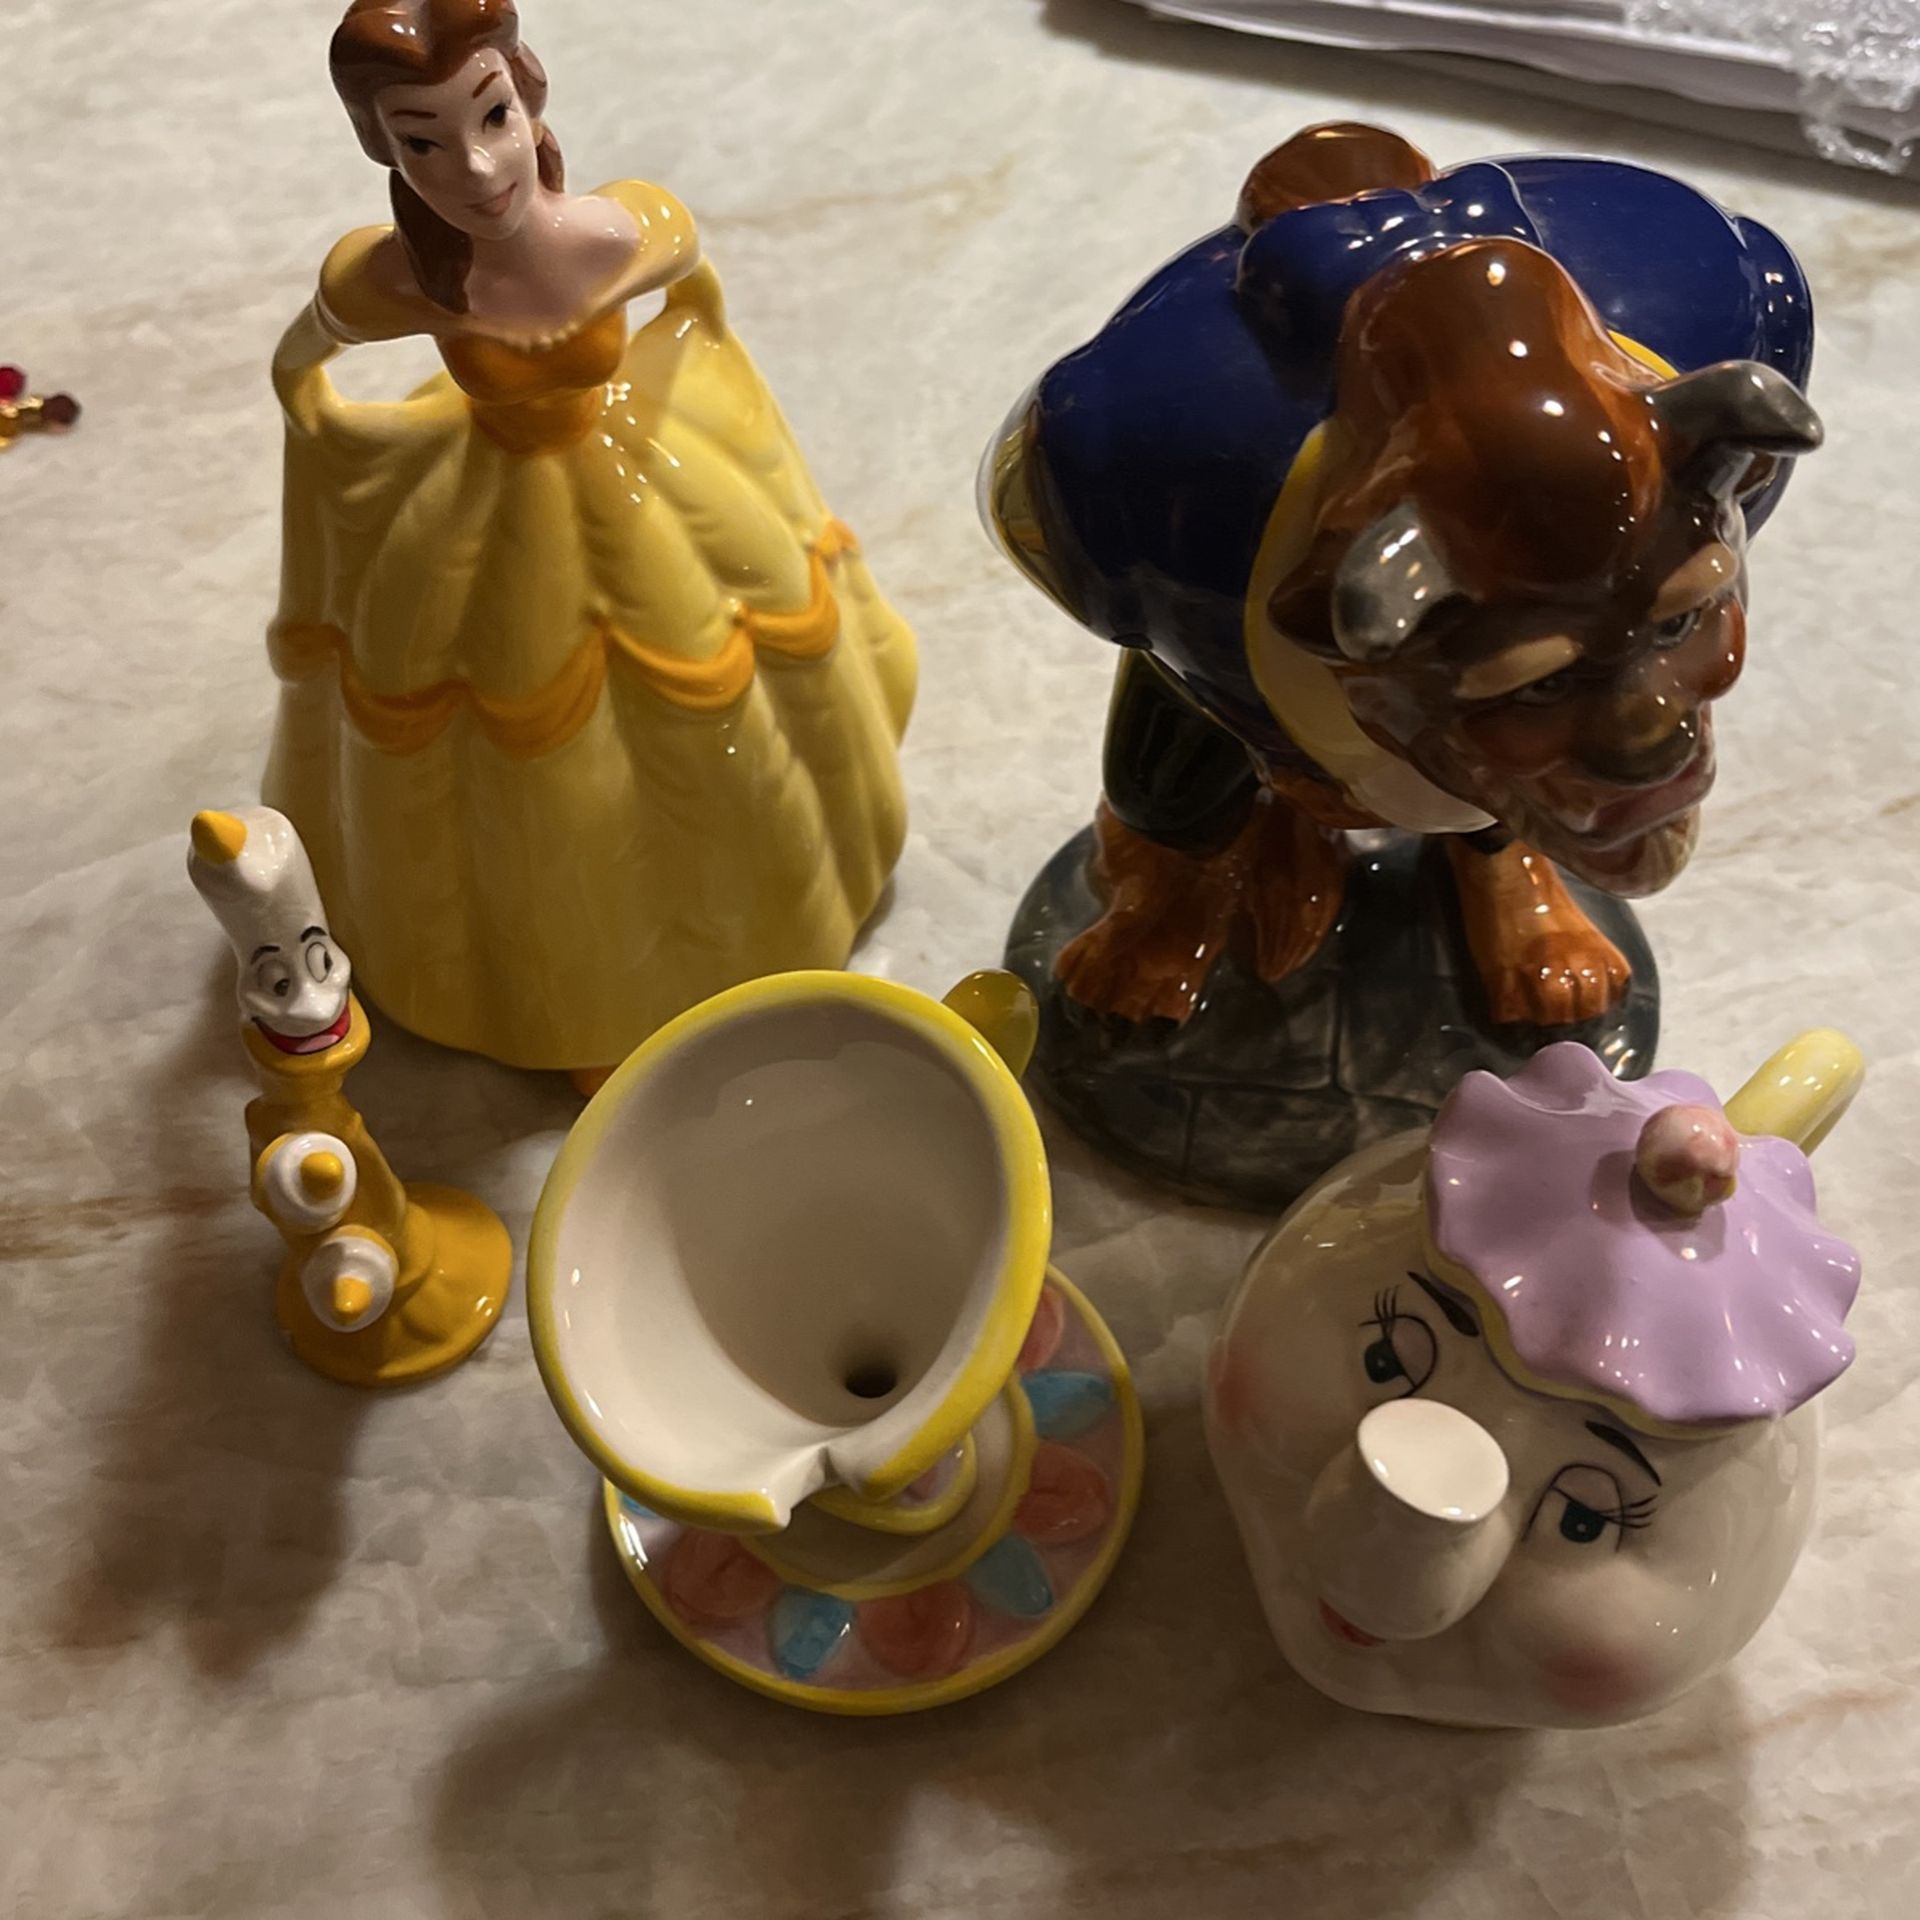 Vintage Disney Beauty And The Beast Figurine Set (In Perfect Condition).